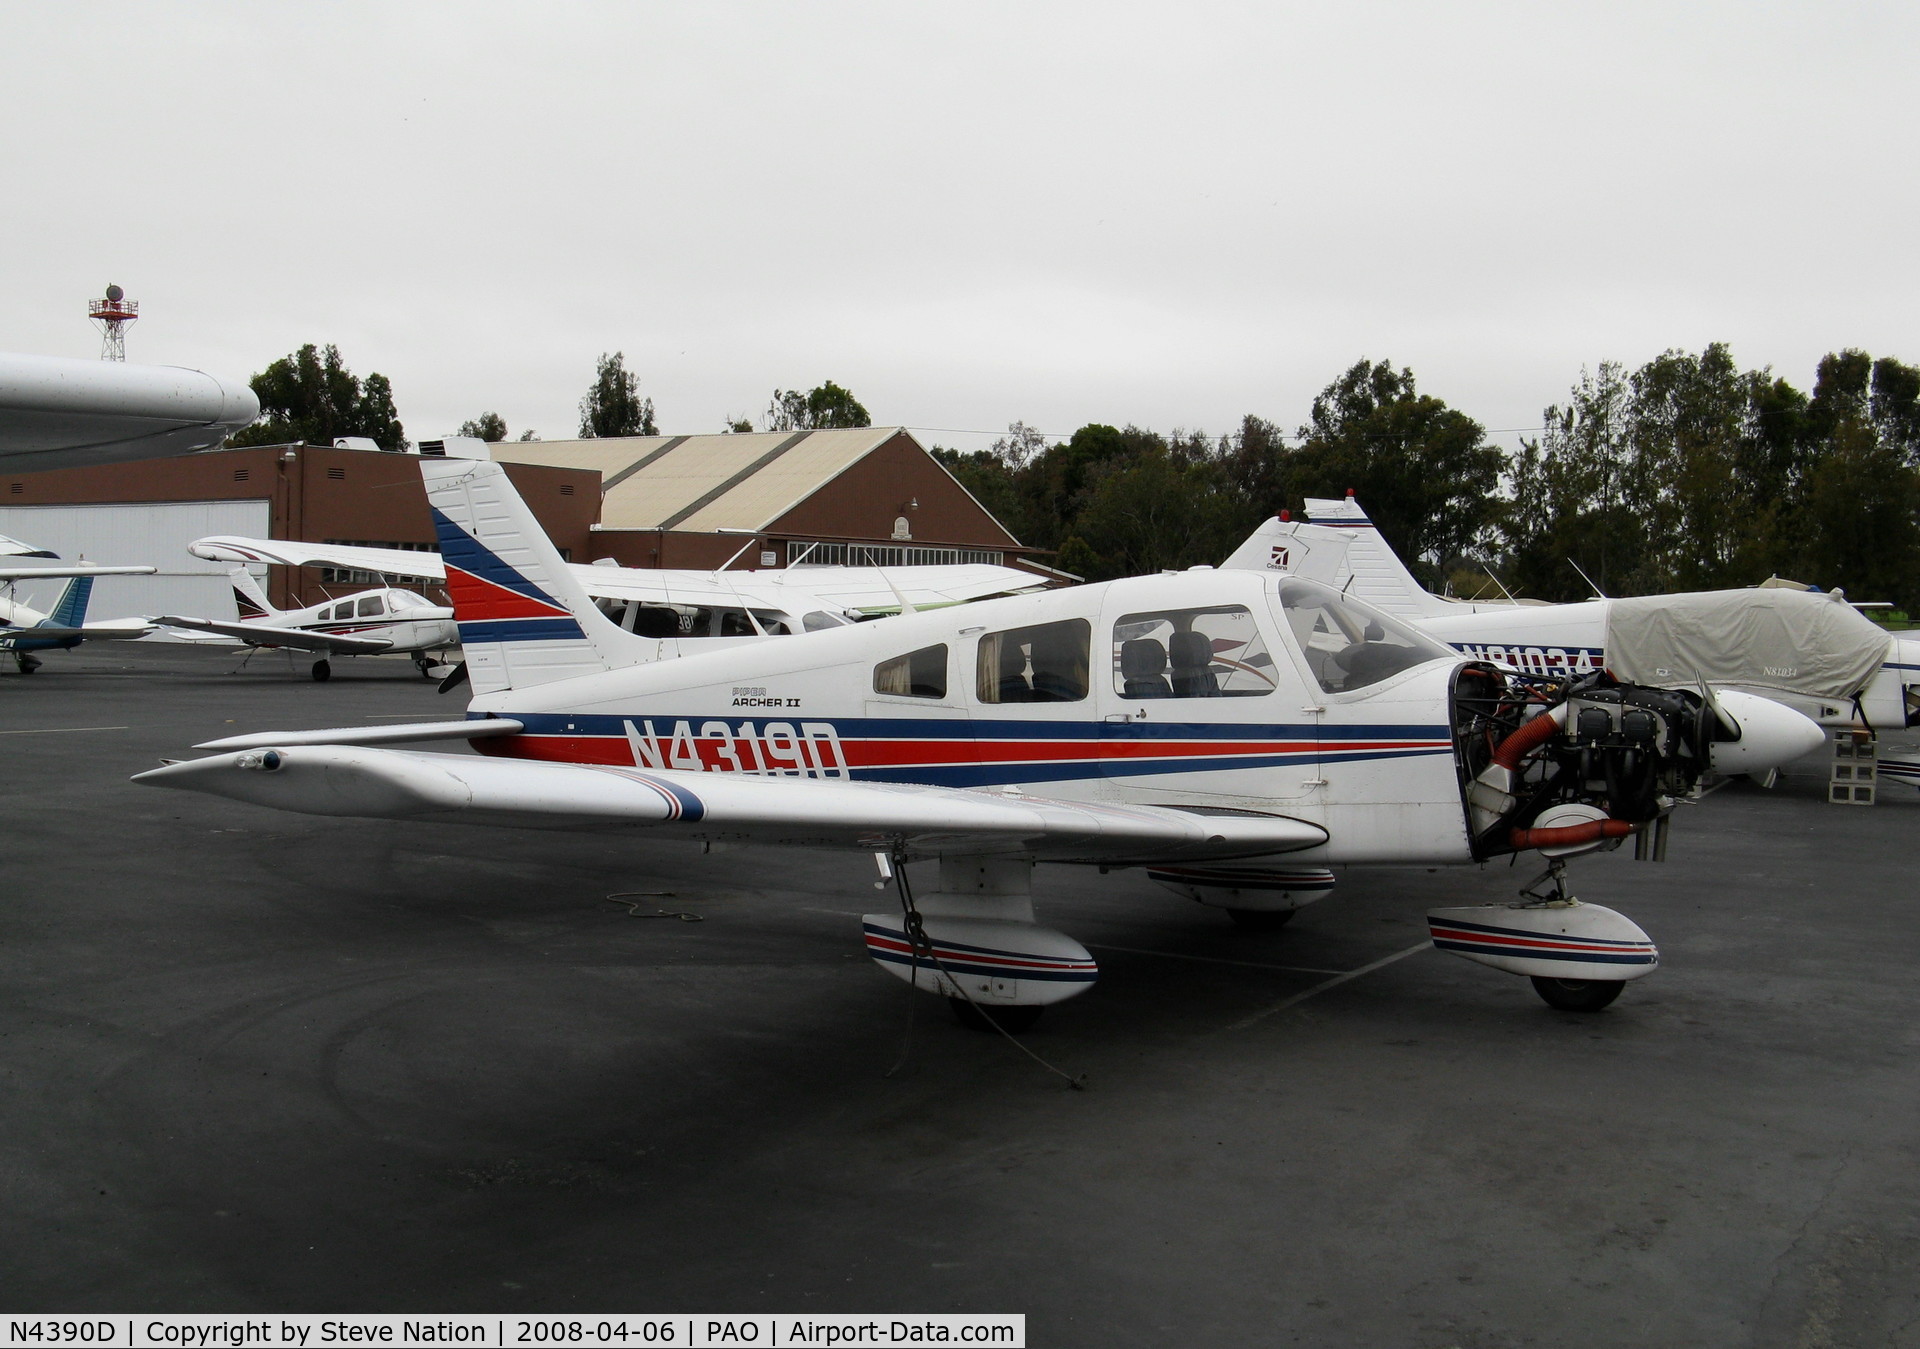 N4390D, 1985 Piper PA-28-161 Warrior C/N 28-8516028, 1985 piper PA-28-161 with cowl door open @ Palo Alto, CA